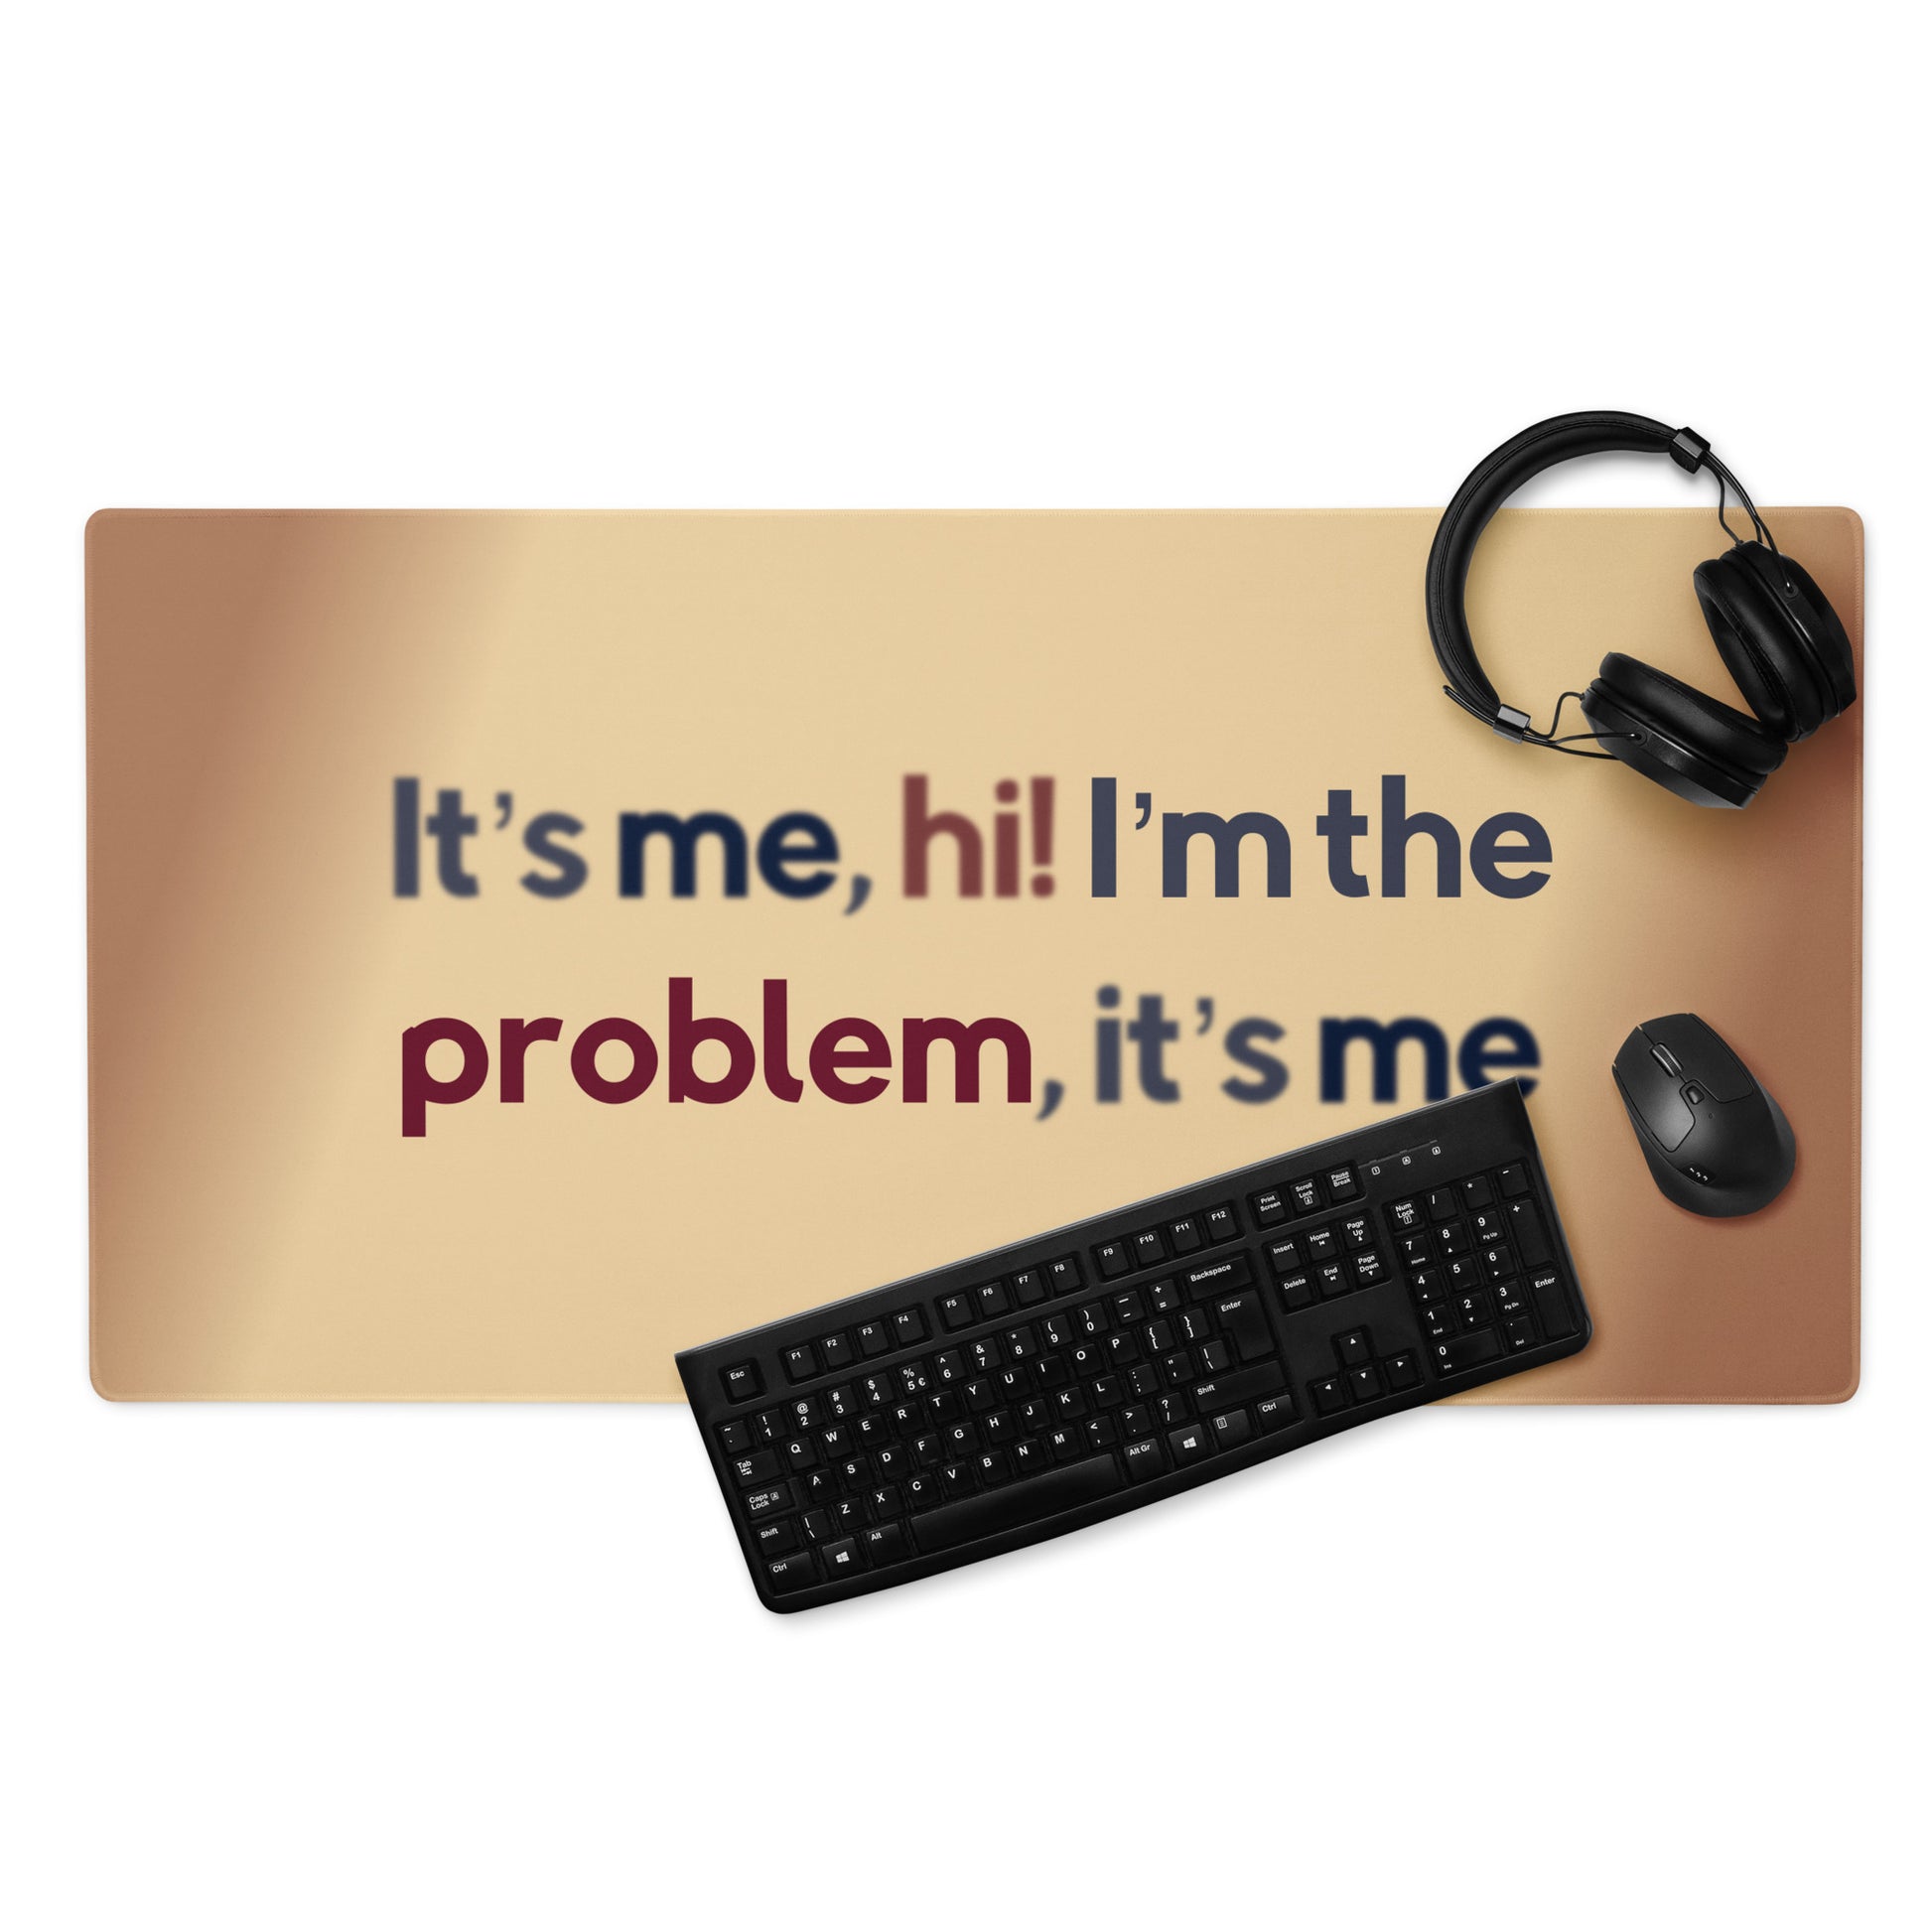 A beige gaming desk pad with the quote It's me, hi! I'm the problem, it's me. A keyboard, headphones, and mouse sit on the desk pad.